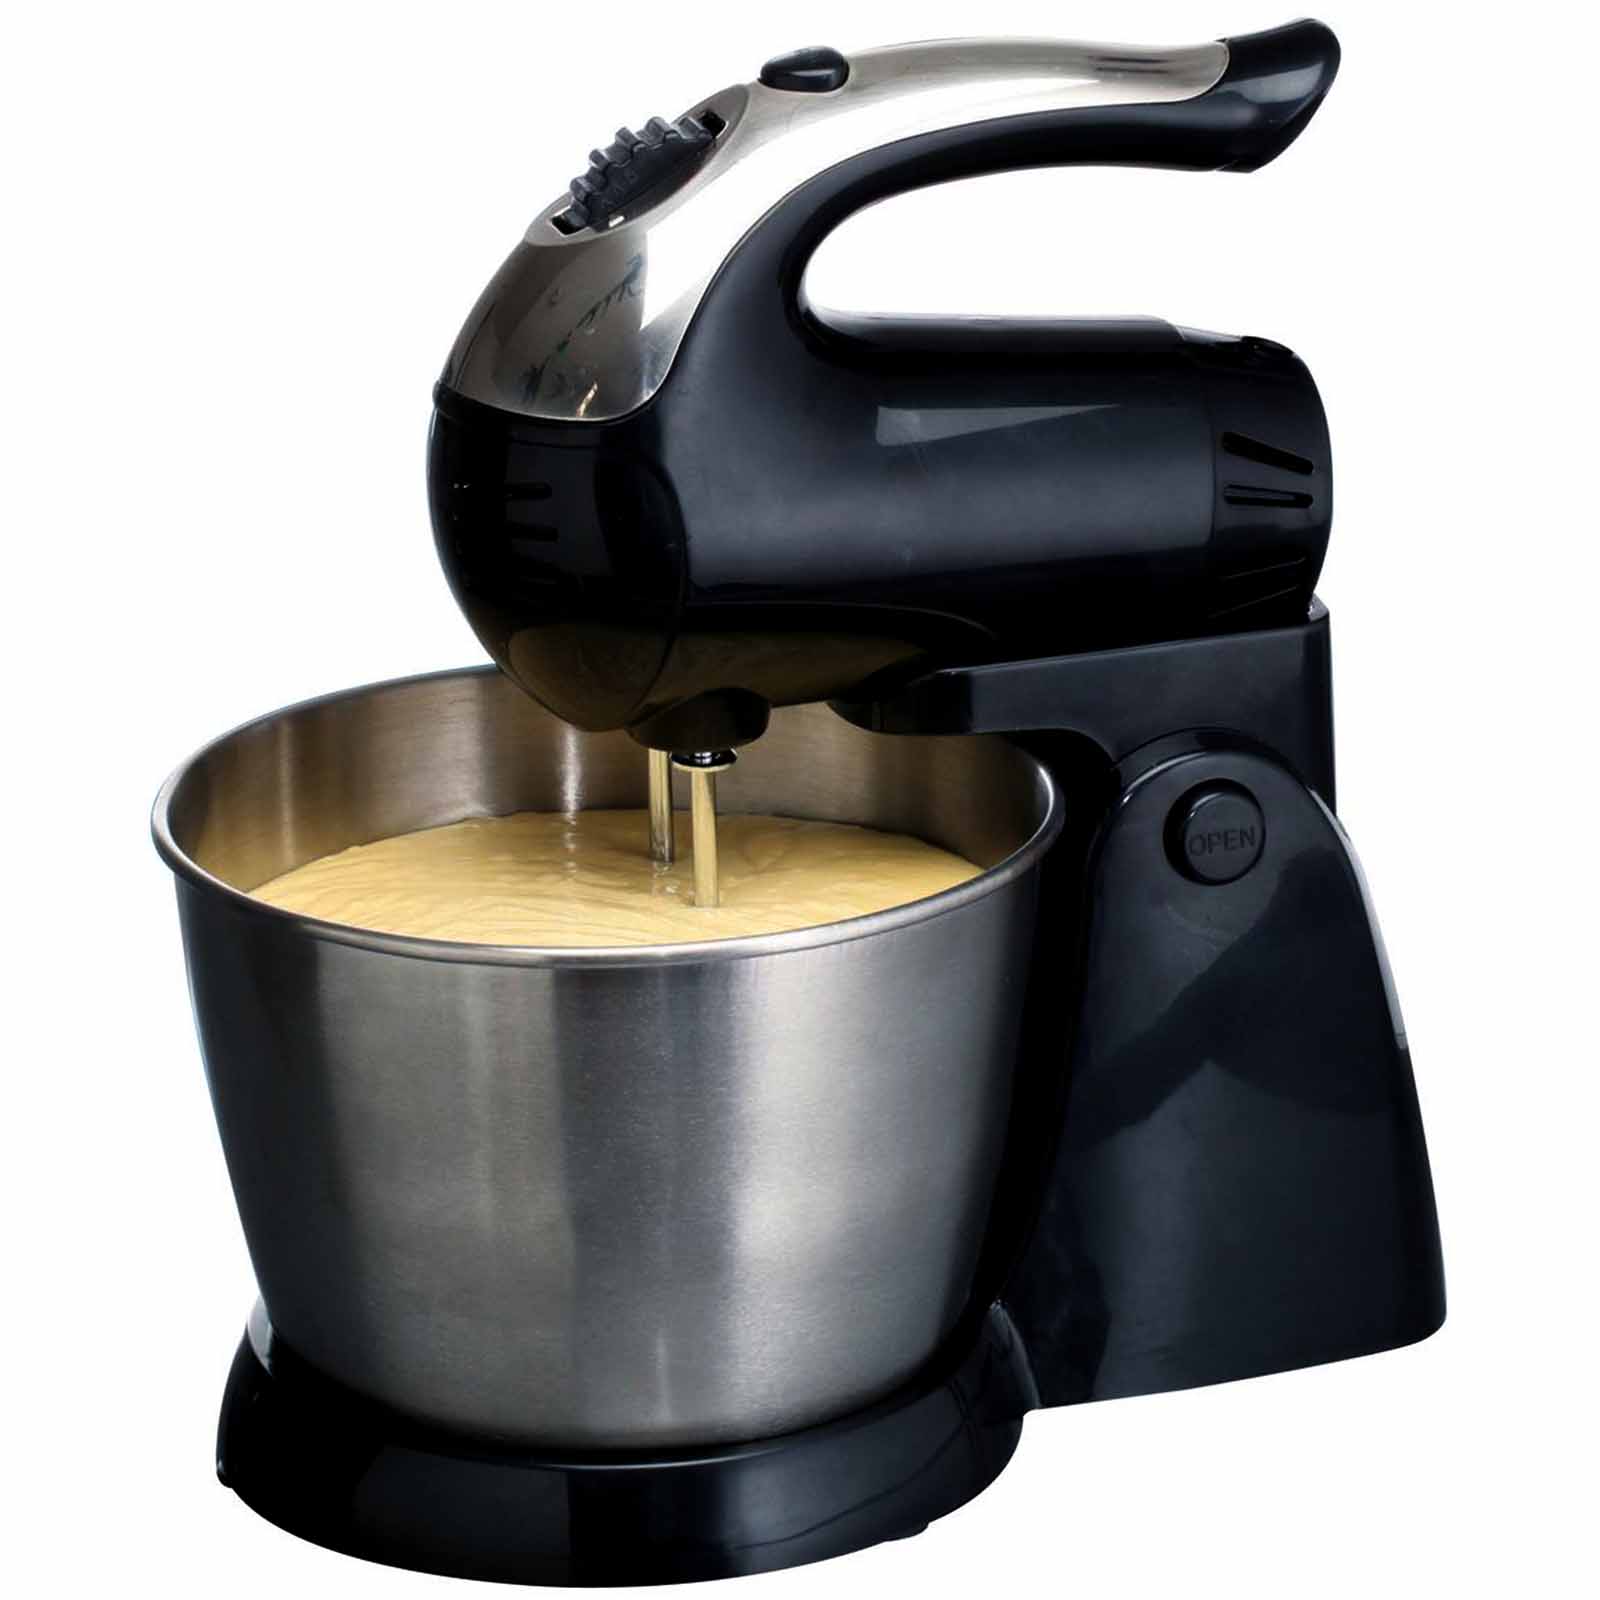 Brentwood 97083190M SM-1153 5 Speed Stand Mixer in Black